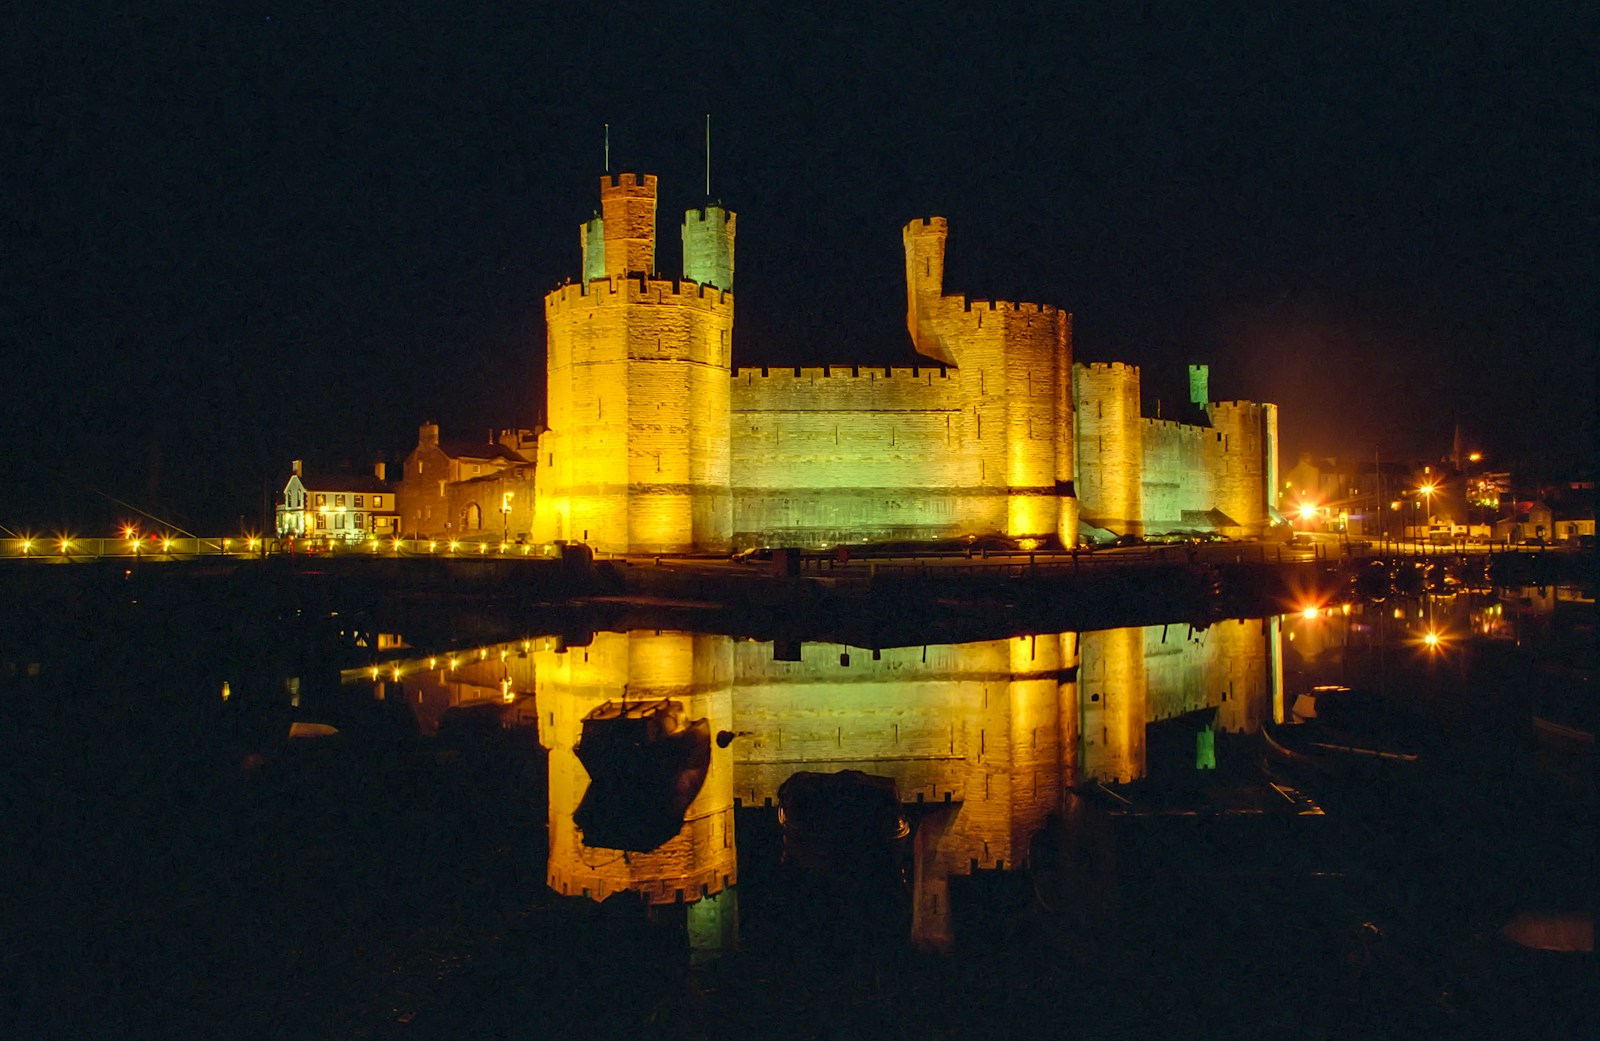 Caernarfon's Castle brown concrete castle on water during night time